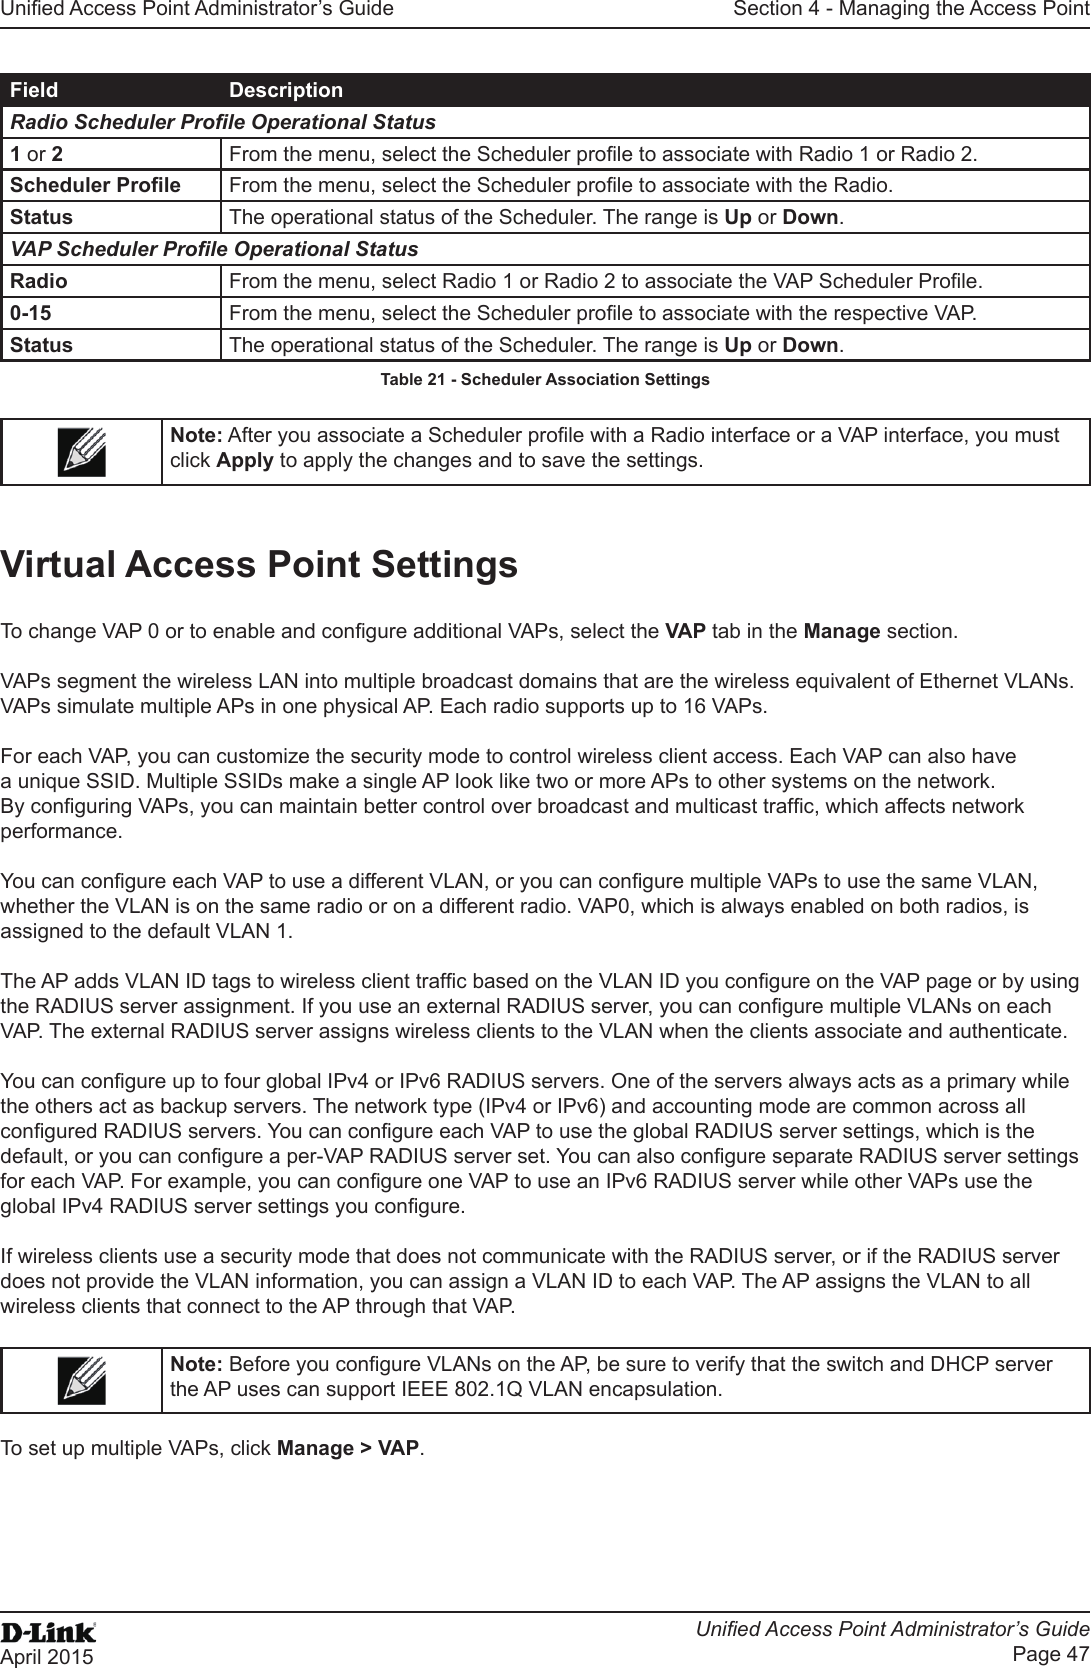 Unied Access Point Administrator’s GuideUnied Access Point Administrator’s GuidePage 47April 2015Section 4 - Managing the Access PointField DescriptionRadio Scheduler Prole Operational Status1 or 2  From the menu, select the Scheduler prole to associate with Radio 1 or Radio 2.Scheduler Prole From the menu, select the Scheduler prole to associate with the Radio.Status The operational status of the Scheduler. The range is Up or Down.VAP Scheduler Prole Operational StatusRadio From the menu, select Radio 1 or Radio 2 to associate the VAP Scheduler Prole.0-15 From the menu, select the Scheduler prole to associate with the respective VAP.Status The operational status of the Scheduler. The range is Up or Down.Table 21 - Scheduler Association SettingsNote: After you associate a Scheduler prole with a Radio interface or a VAP interface, you must click Apply to apply the changes and to save the settings.Virtual Access Point SettingsTo change VAP 0 or to enable and congure additional VAPs, select the VAP tab in the Manage section.VAPs segment the wireless LAN into multiple broadcast domains that are the wireless equivalent of Ethernet VLANs. VAPs simulate multiple APs in one physical AP. Each radio supports up to 16 VAPs.For each VAP, you can customize the security mode to control wireless client access. Each VAP can also have a unique SSID. Multiple SSIDs make a single AP look like two or more APs to other systems on the network. By conguring VAPs, you can maintain better control over broadcast and multicast trafc, which affects network performance. You can congure each VAP to use a different VLAN, or you can congure multiple VAPs to use the same VLAN, whether the VLAN is on the same radio or on a different radio. VAP0, which is always enabled on both radios, is assigned to the default VLAN 1.The AP adds VLAN ID tags to wireless client trafc based on the VLAN ID you congure on the VAP page or by using the RADIUS server assignment. If you use an external RADIUS server, you can congure multiple VLANs on each VAP. The external RADIUS server assigns wireless clients to the VLAN when the clients associate and authenticate.You can congure up to four global IPv4 or IPv6 RADIUS servers. One of the servers always acts as a primary while the others act as backup servers. The network type (IPv4 or IPv6) and accounting mode are common across all congured RADIUS servers. You can congure each VAP to use the global RADIUS server settings, which is the default, or you can congure a per-VAP RADIUS server set. You can also congure separate RADIUS server settings for each VAP. For example, you can congure one VAP to use an IPv6 RADIUS server while other VAPs use the global IPv4 RADIUS server settings you congure.If wireless clients use a security mode that does not communicate with the RADIUS server, or if the RADIUS server does not provide the VLAN information, you can assign a VLAN ID to each VAP. The AP assigns the VLAN to all wireless clients that connect to the AP through that VAP.Note: Before you congure VLANs on the AP, be sure to verify that the switch and DHCP server the AP uses can support IEEE 802.1Q VLAN encapsulation. To set up multiple VAPs, click Manage &gt; VAP.